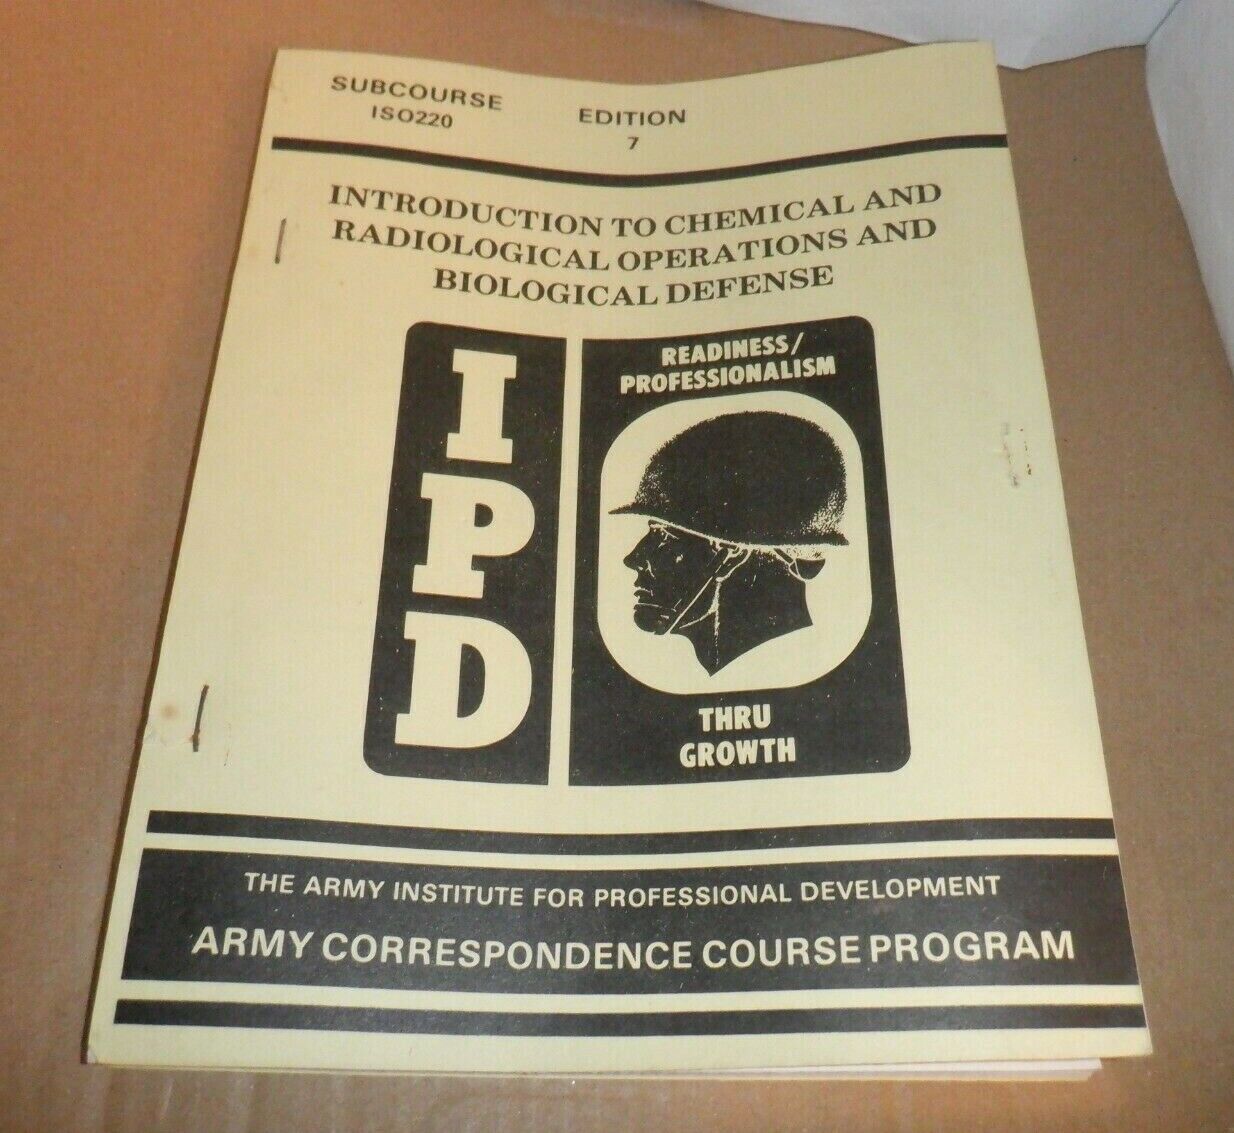 1970/80s CHEMICAL RADIOLOGICAL BIOLOGICAL DEF IPD ARMY SUBCOURSE TRAINING MANUAL